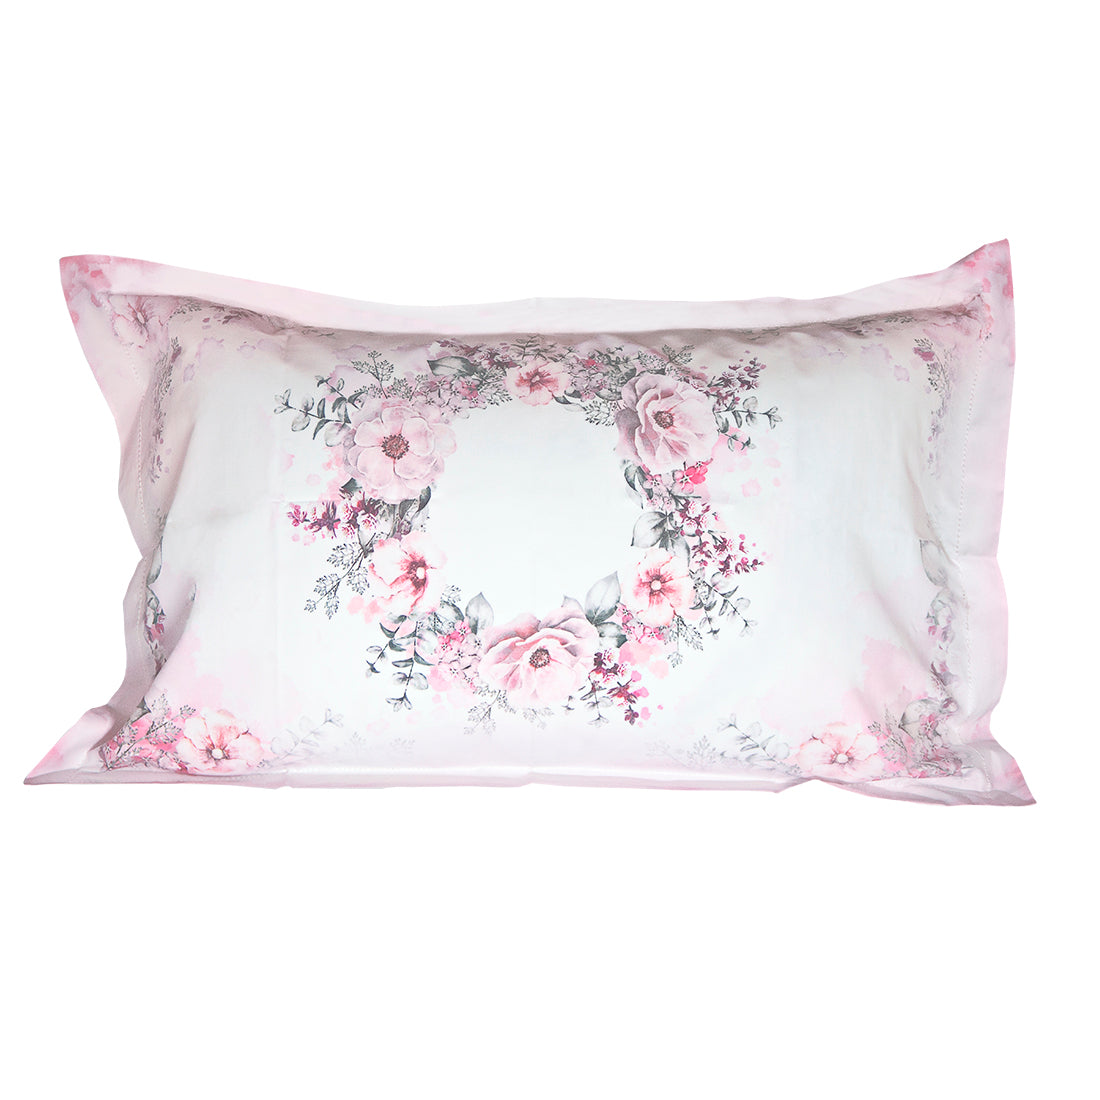 V2G Printed Pillow Covers Round Floral Pattern- Pair